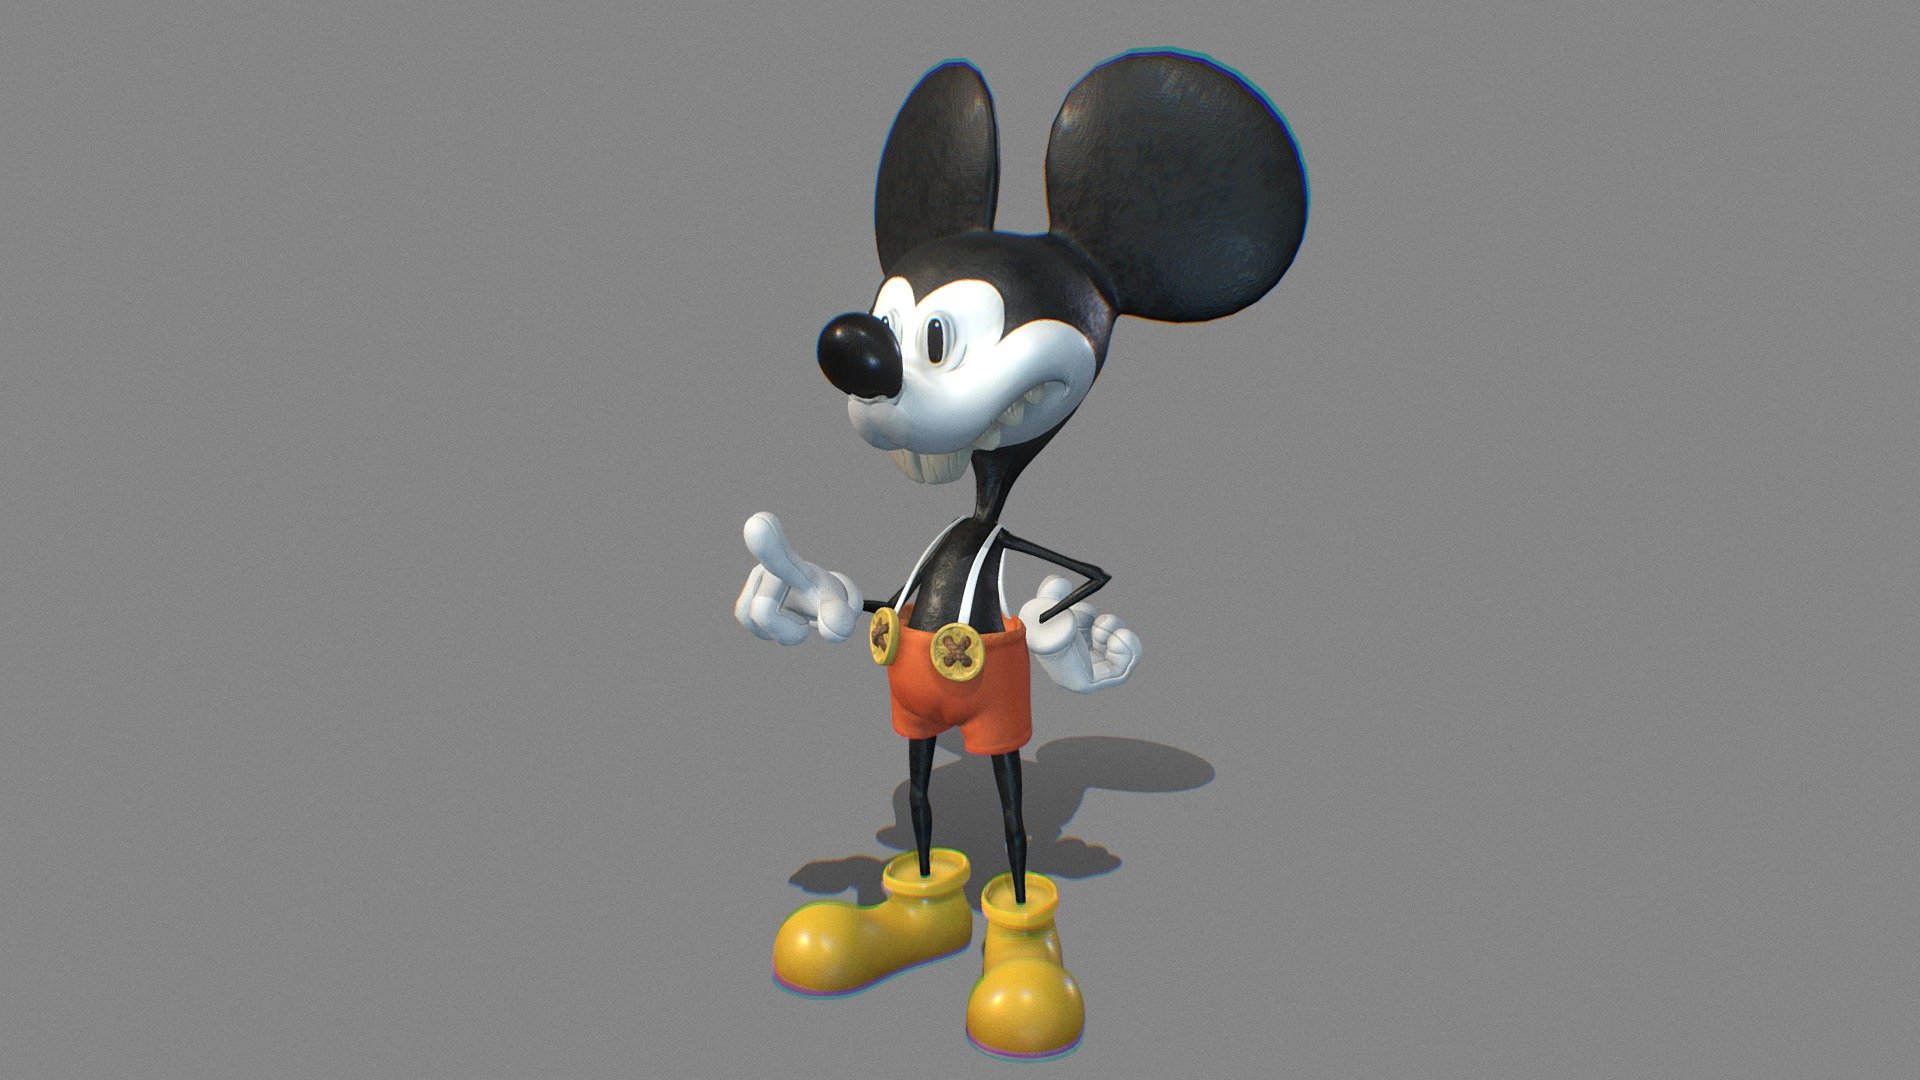 **Stylized 3D Mickey Mouse model - Fan-Art

It took me roundly, 5 hours.

Standard light

Zbrush, Maya, Substance painter and marmoset toolbag used to make this model.

Concept by: Creaturebox

If you’ve been captivated by what you’ve just witnessed and find yourself in need of assistance with a project that resonates with a similar graphic style, please don’t hesitate to reach out. Your creative vision is my passion, and together, we can transform ideas into awe-inspiring realities. Let’s collaborate and bring your next project to life!

**ricardofra86@gmail.com - Mickey Mouse - Fan Art - 3D model by JustNoctem_ (@ricardofra86) 3d model